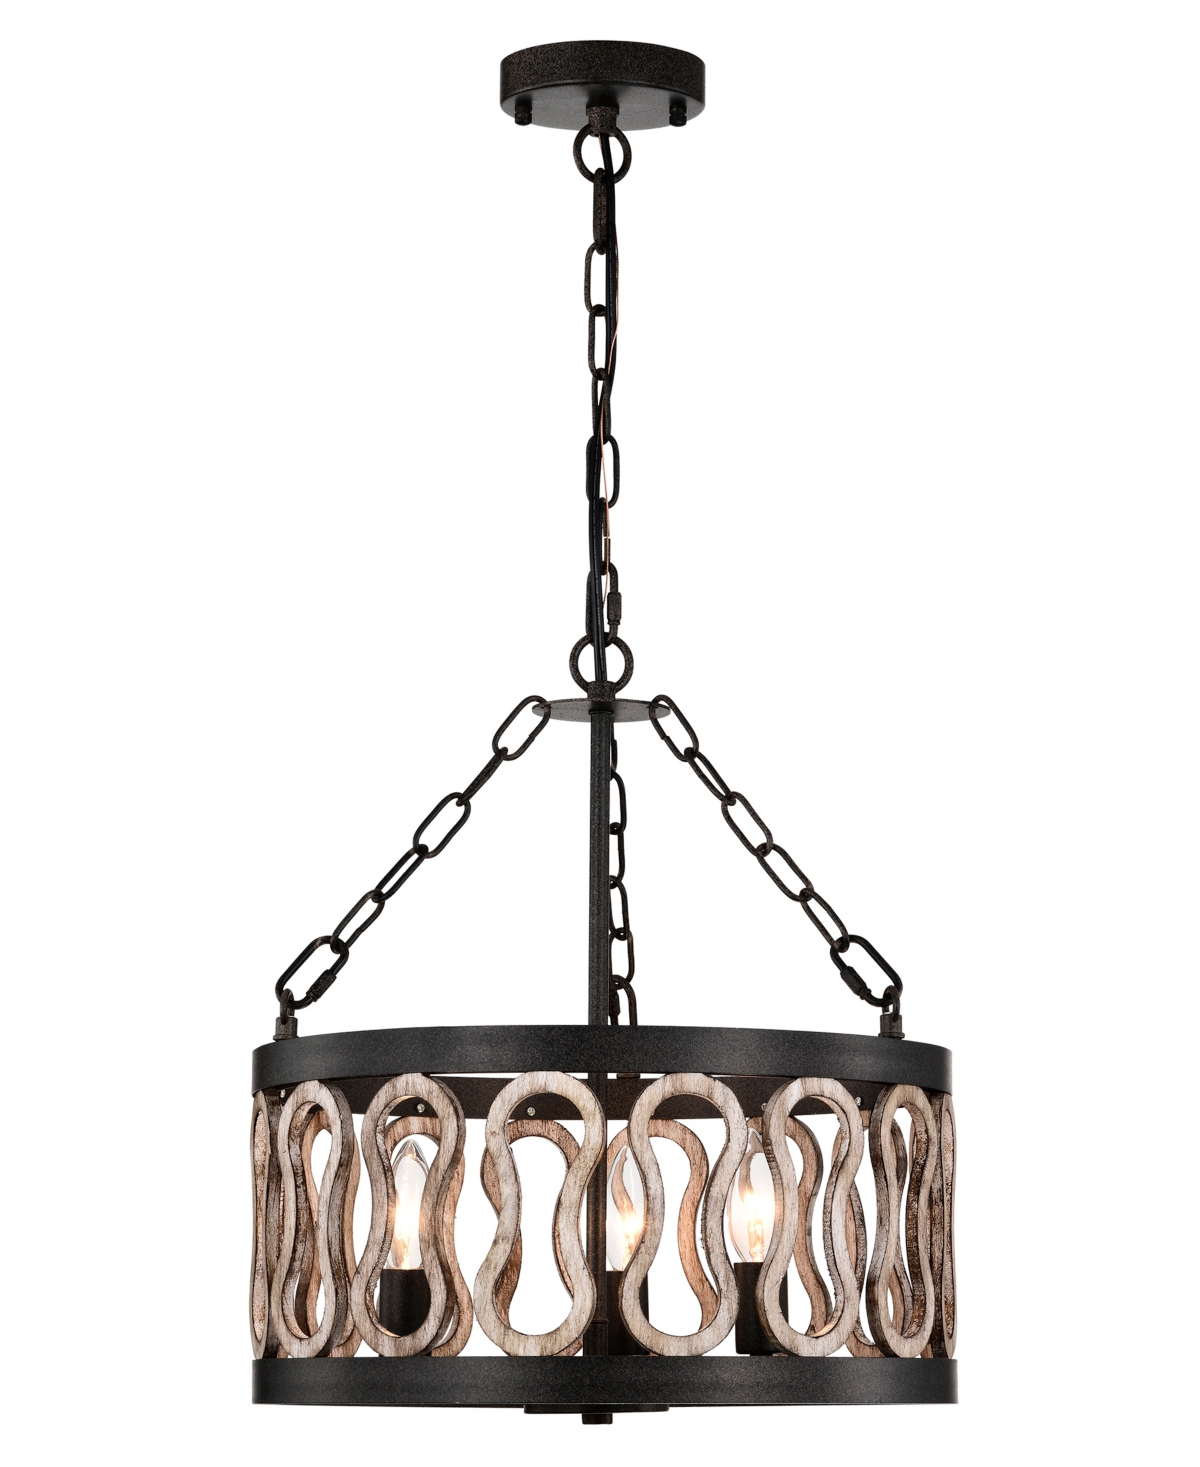 Home Accessories Dalen 16" Indoor Finish Chandelier With Light Kit In Rustic Black And Faux Wood Grain